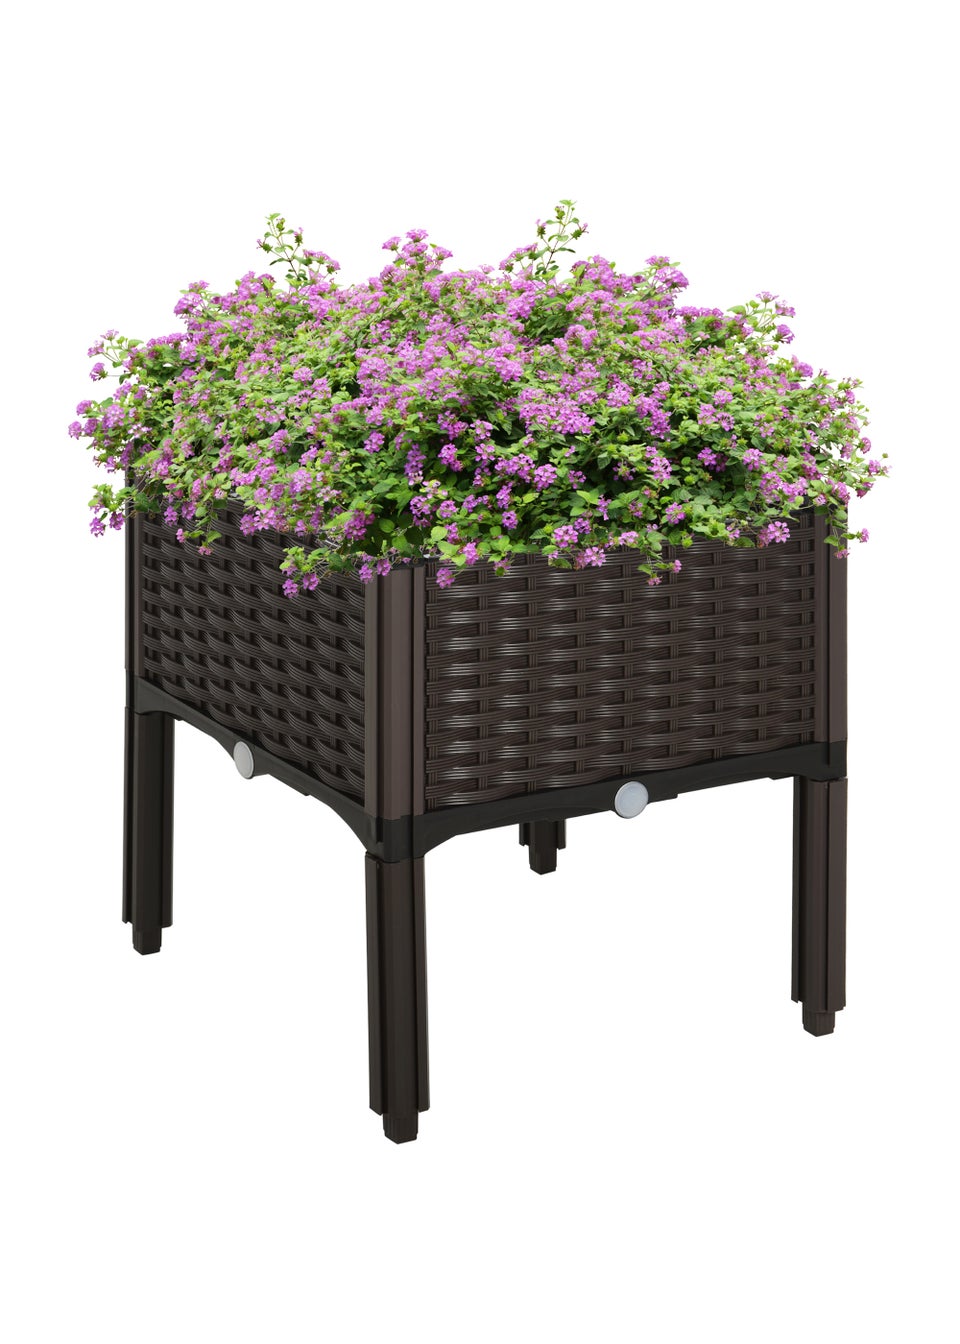 Outsunny Elevated Flower Bed (40cm x 40cm x 44cm)